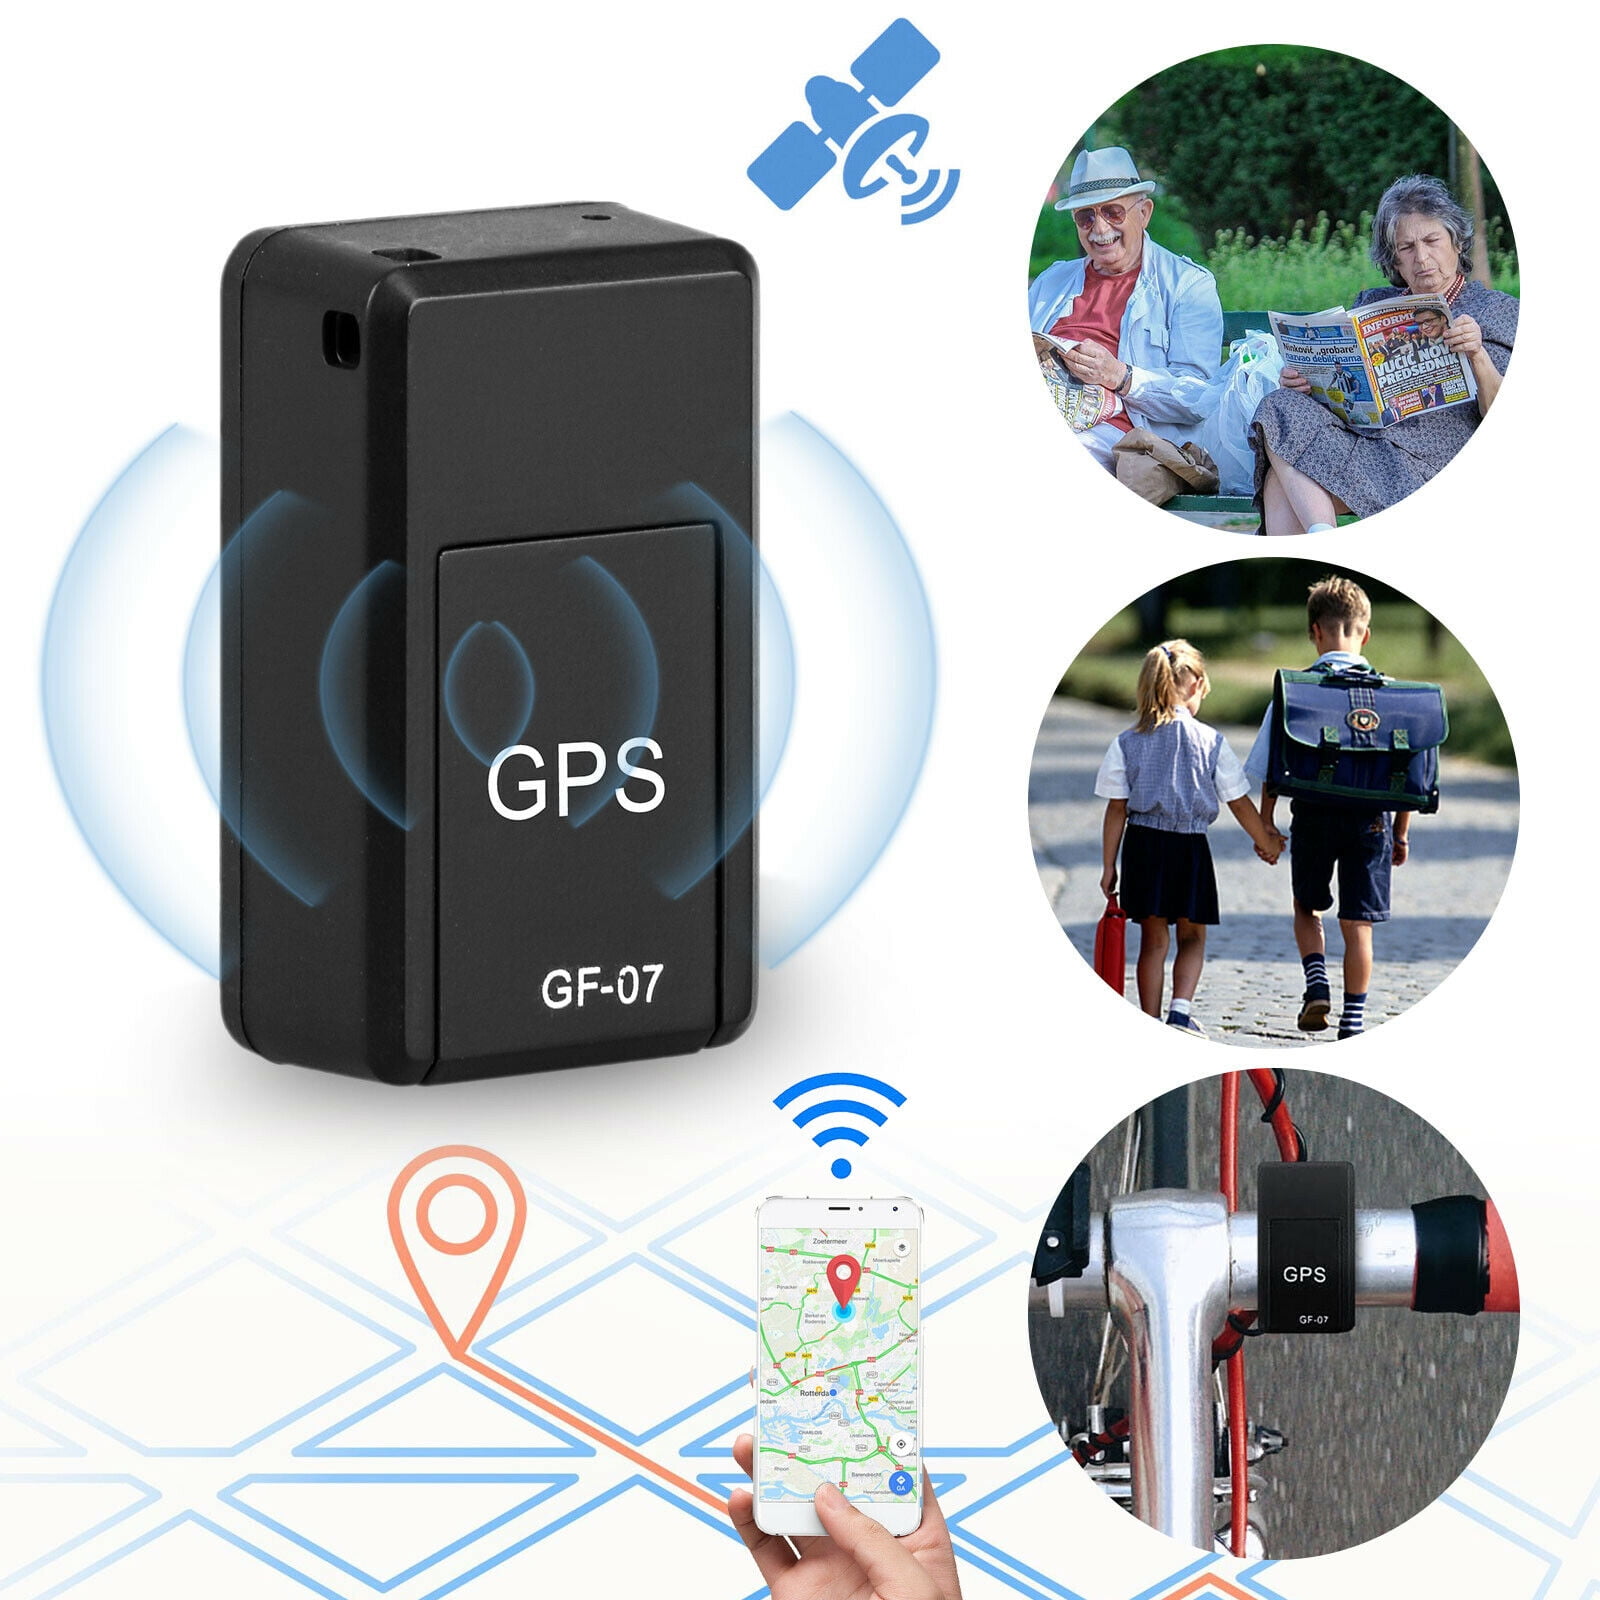 GPS Tracker - Portable Mini Hidden Real-Time GPS Tracking Device for